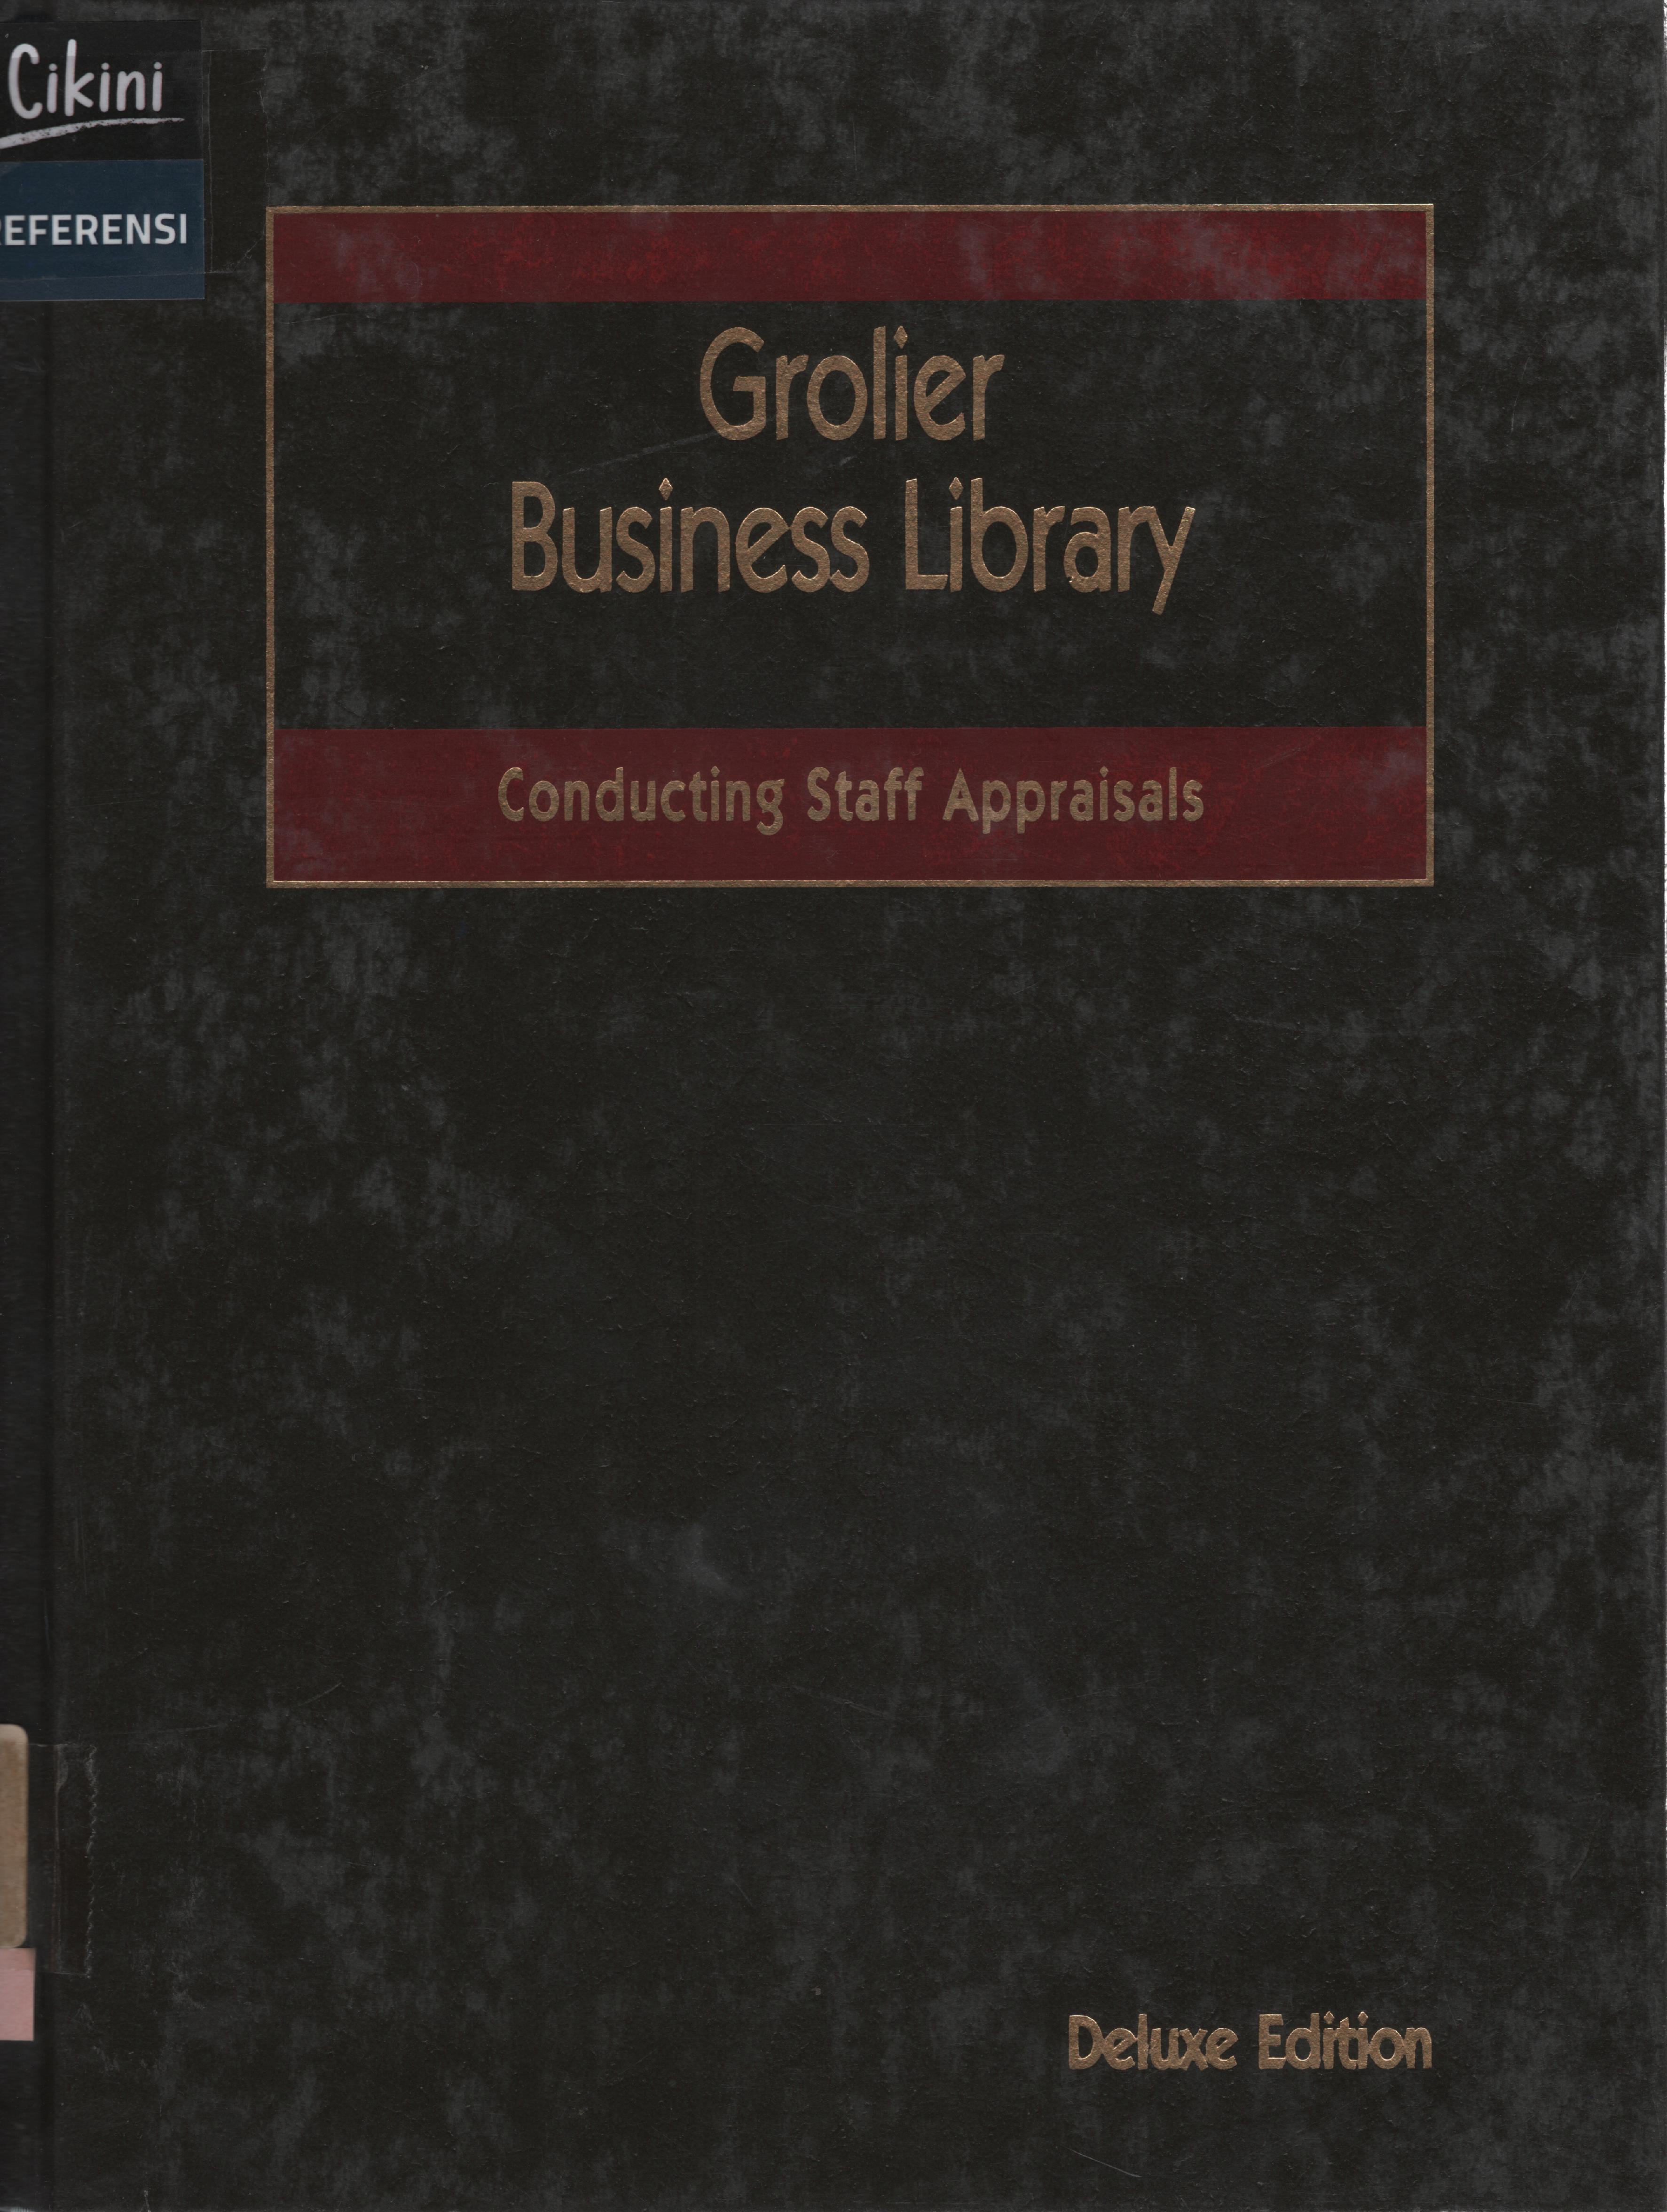 Grolier business library :  conducting staff appraisals